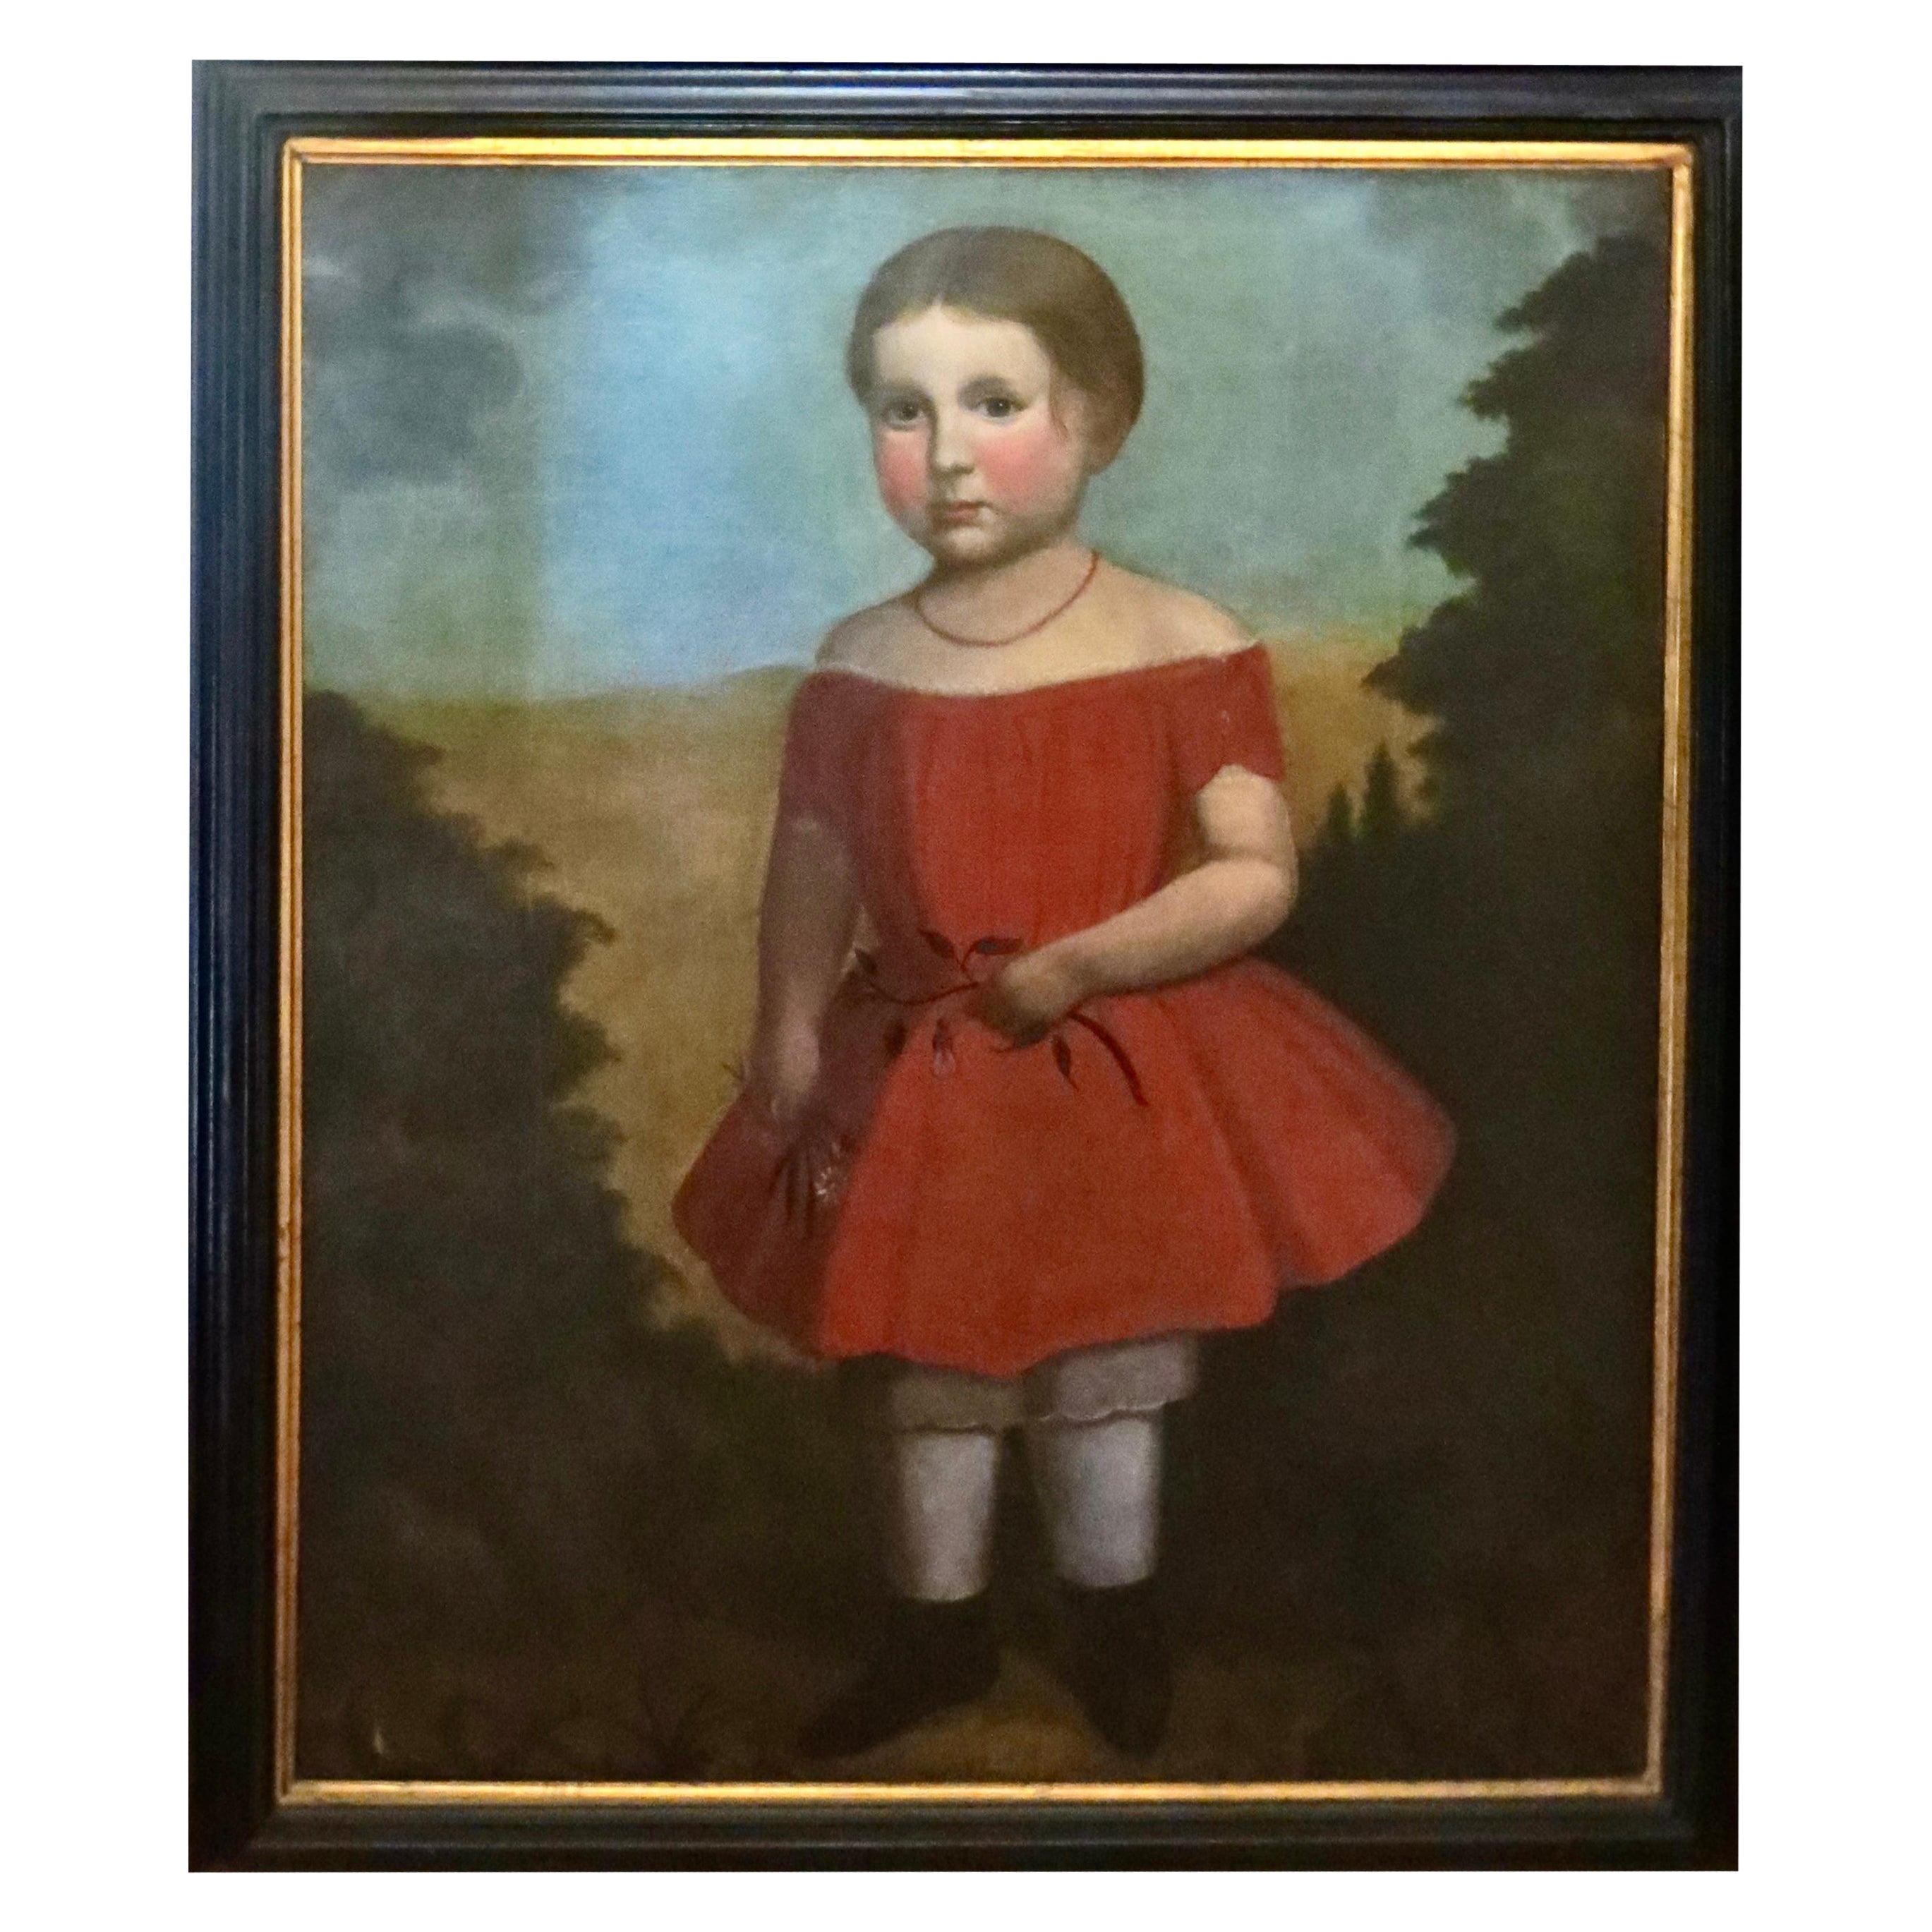 Folk Art Portrait Painting "Young Girl In a Red Dress", American, Circa 1825